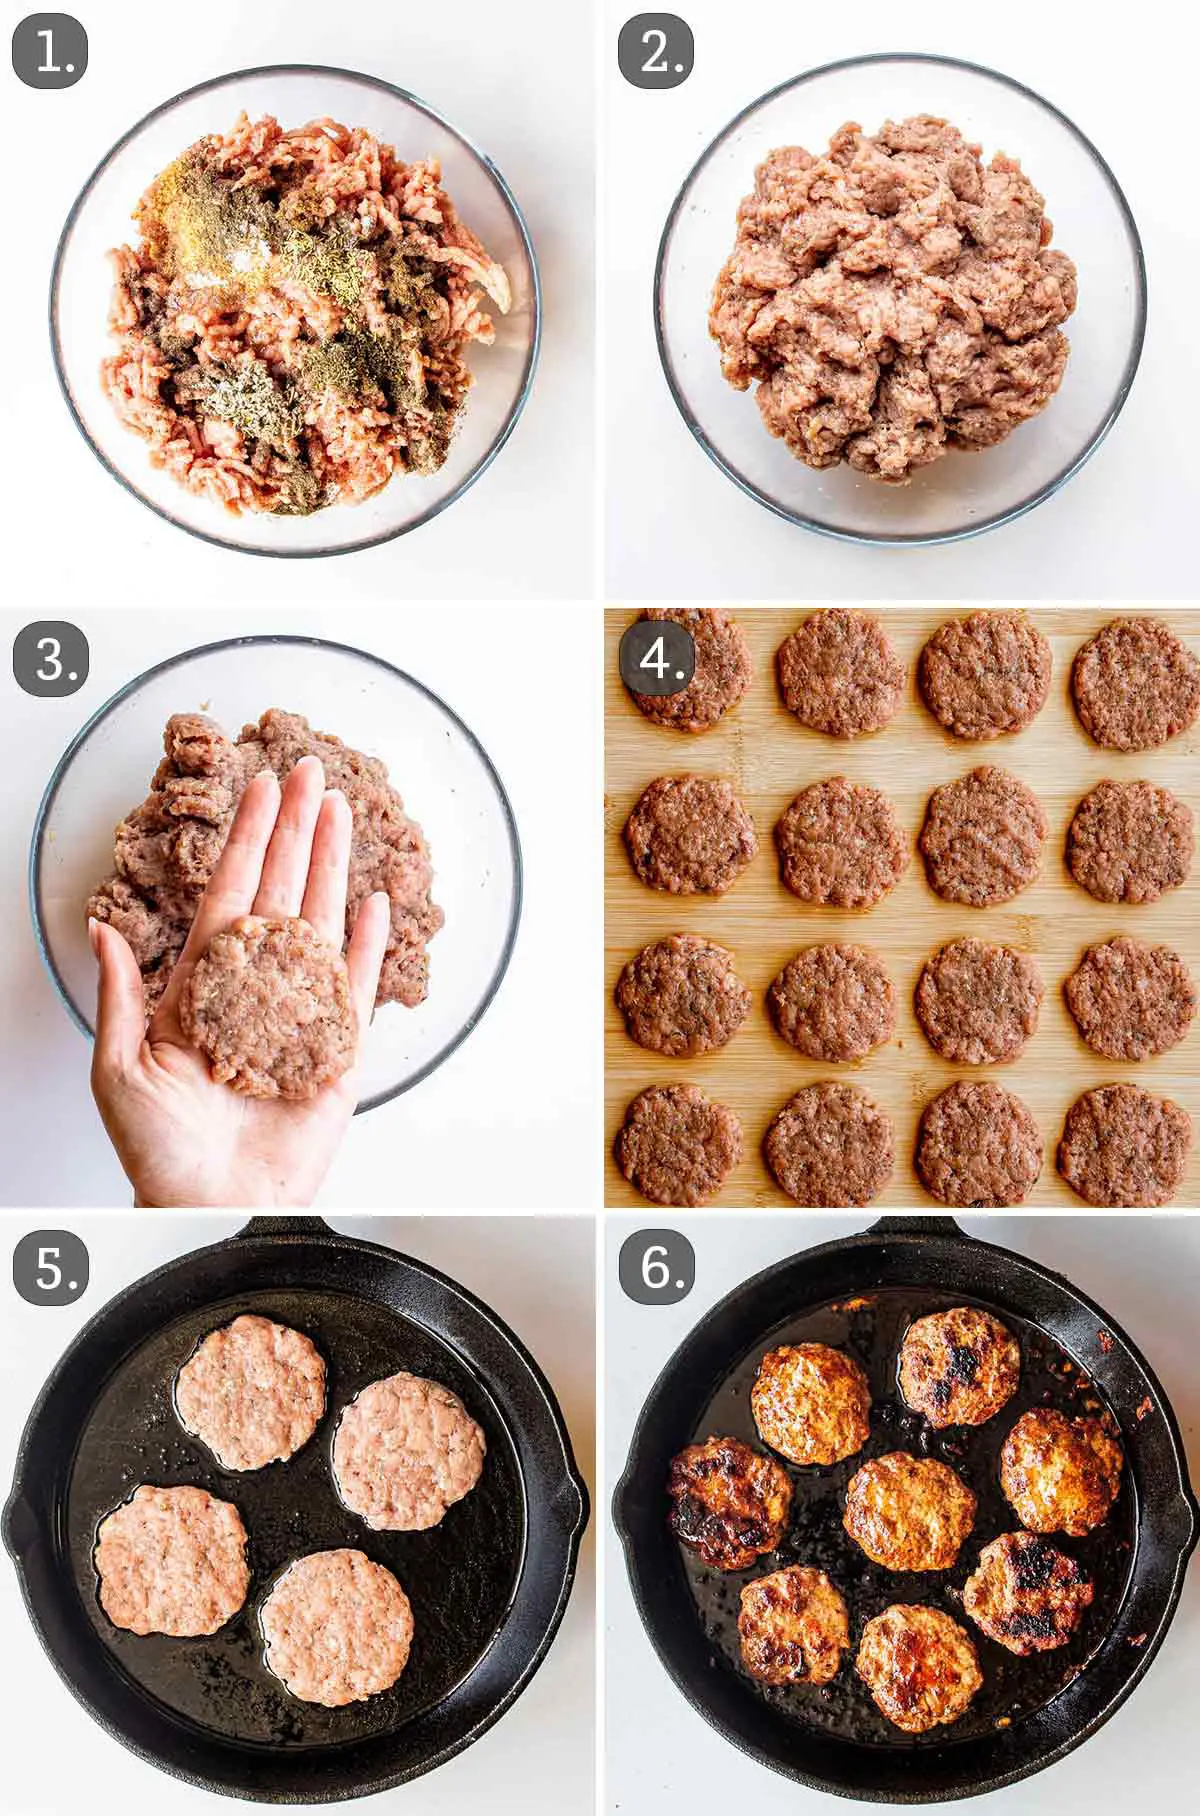 detailed process shots showing how to make homemade breakfast sausages.